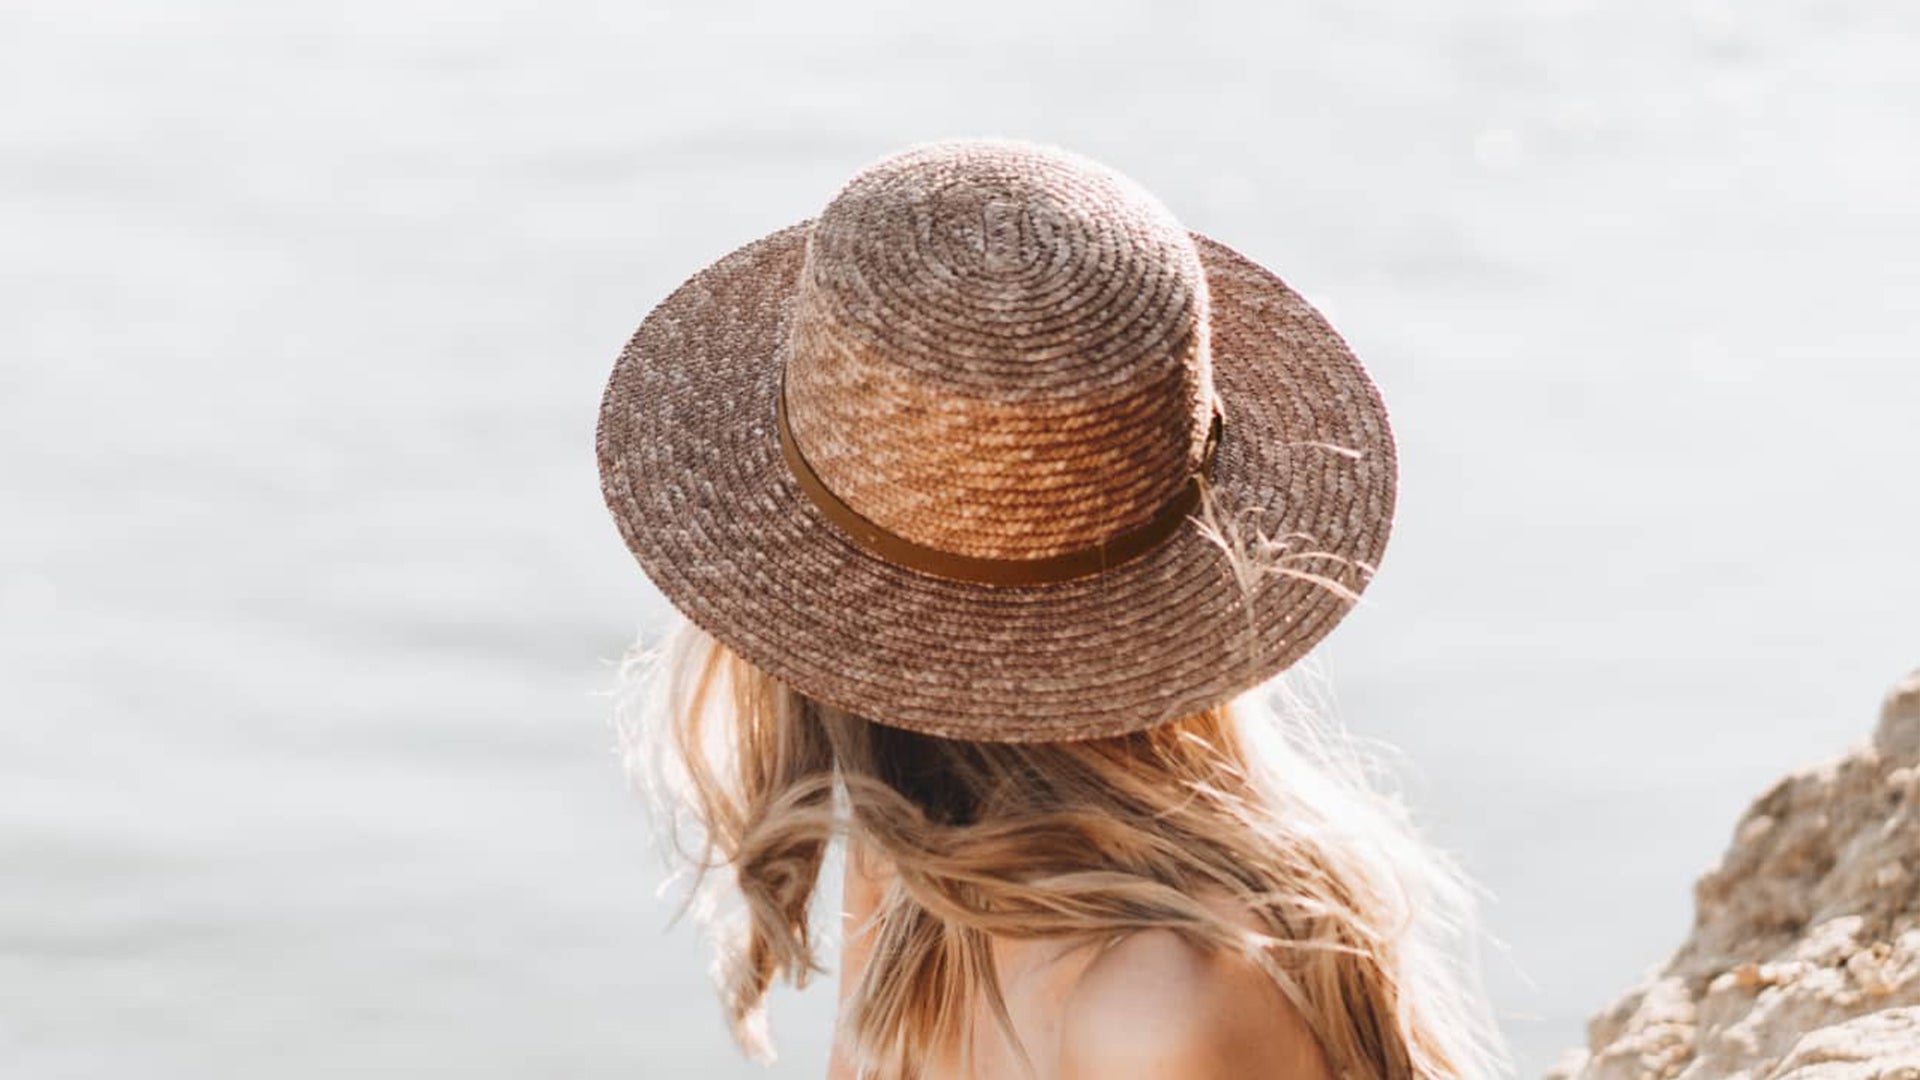 Buy fashion hats for women from a reputed online store